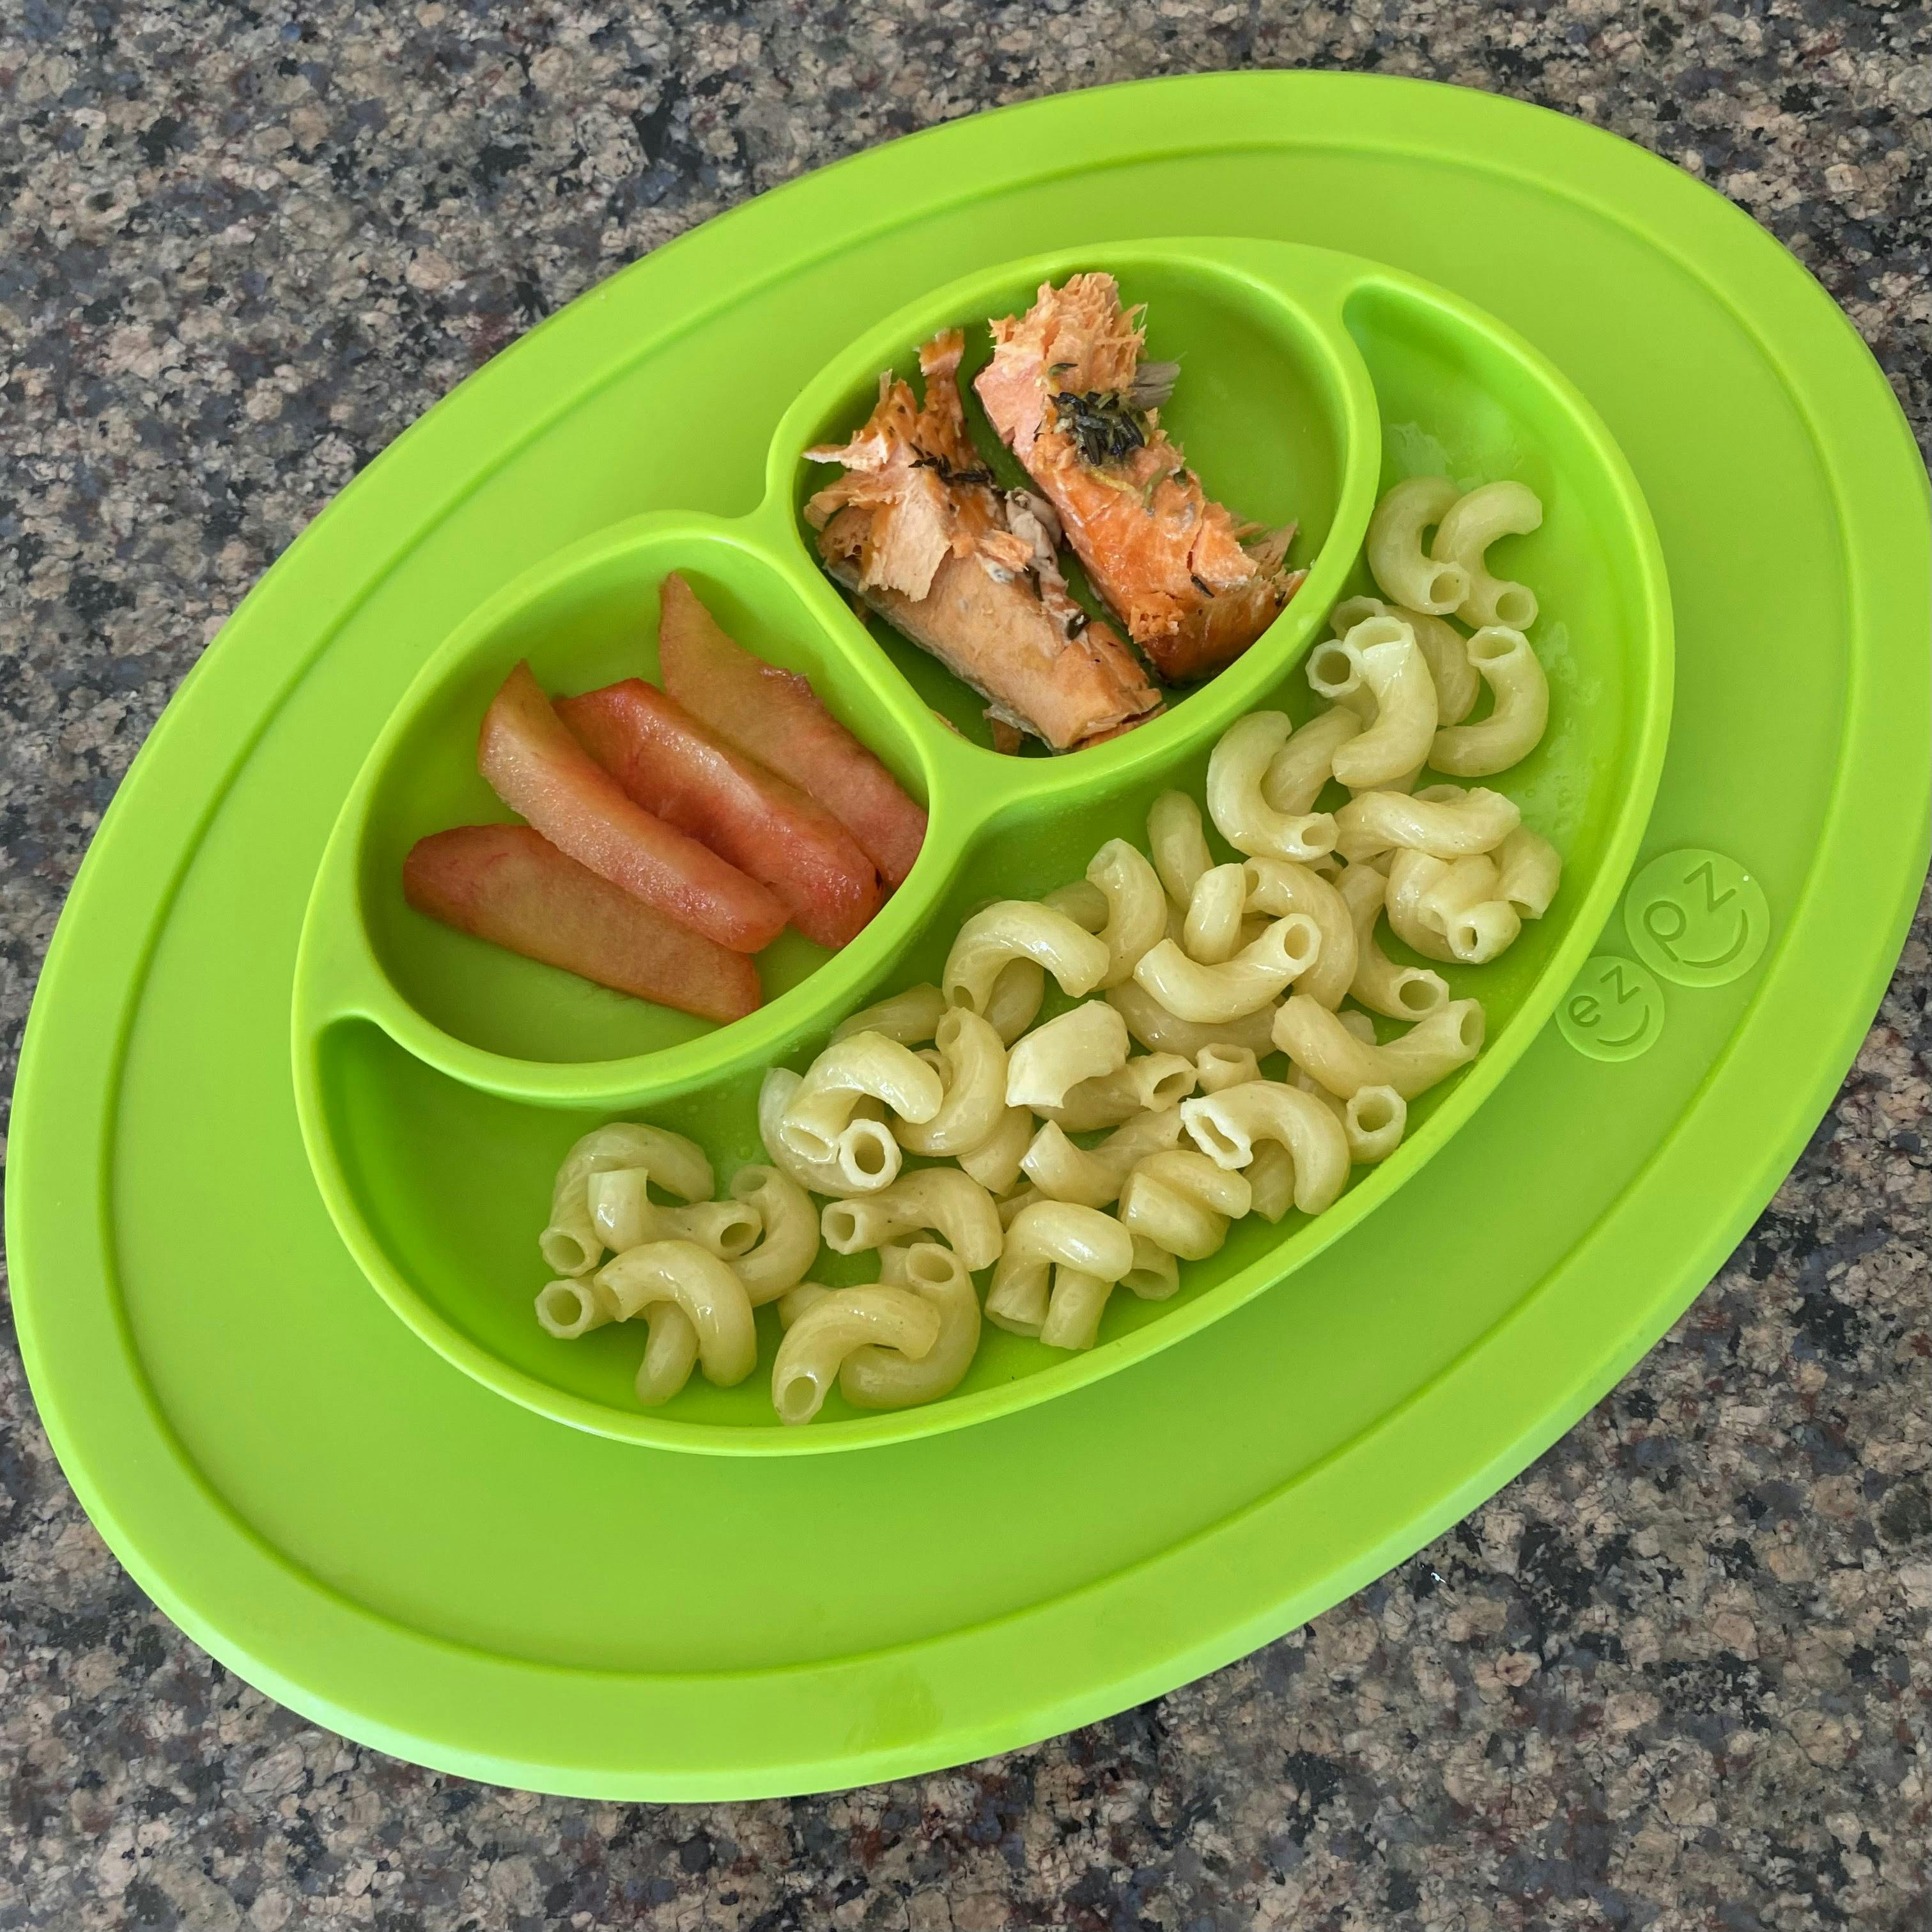 ezpz Mini Mat with plain pasta, strips of fruit and strips of salmon in the plate